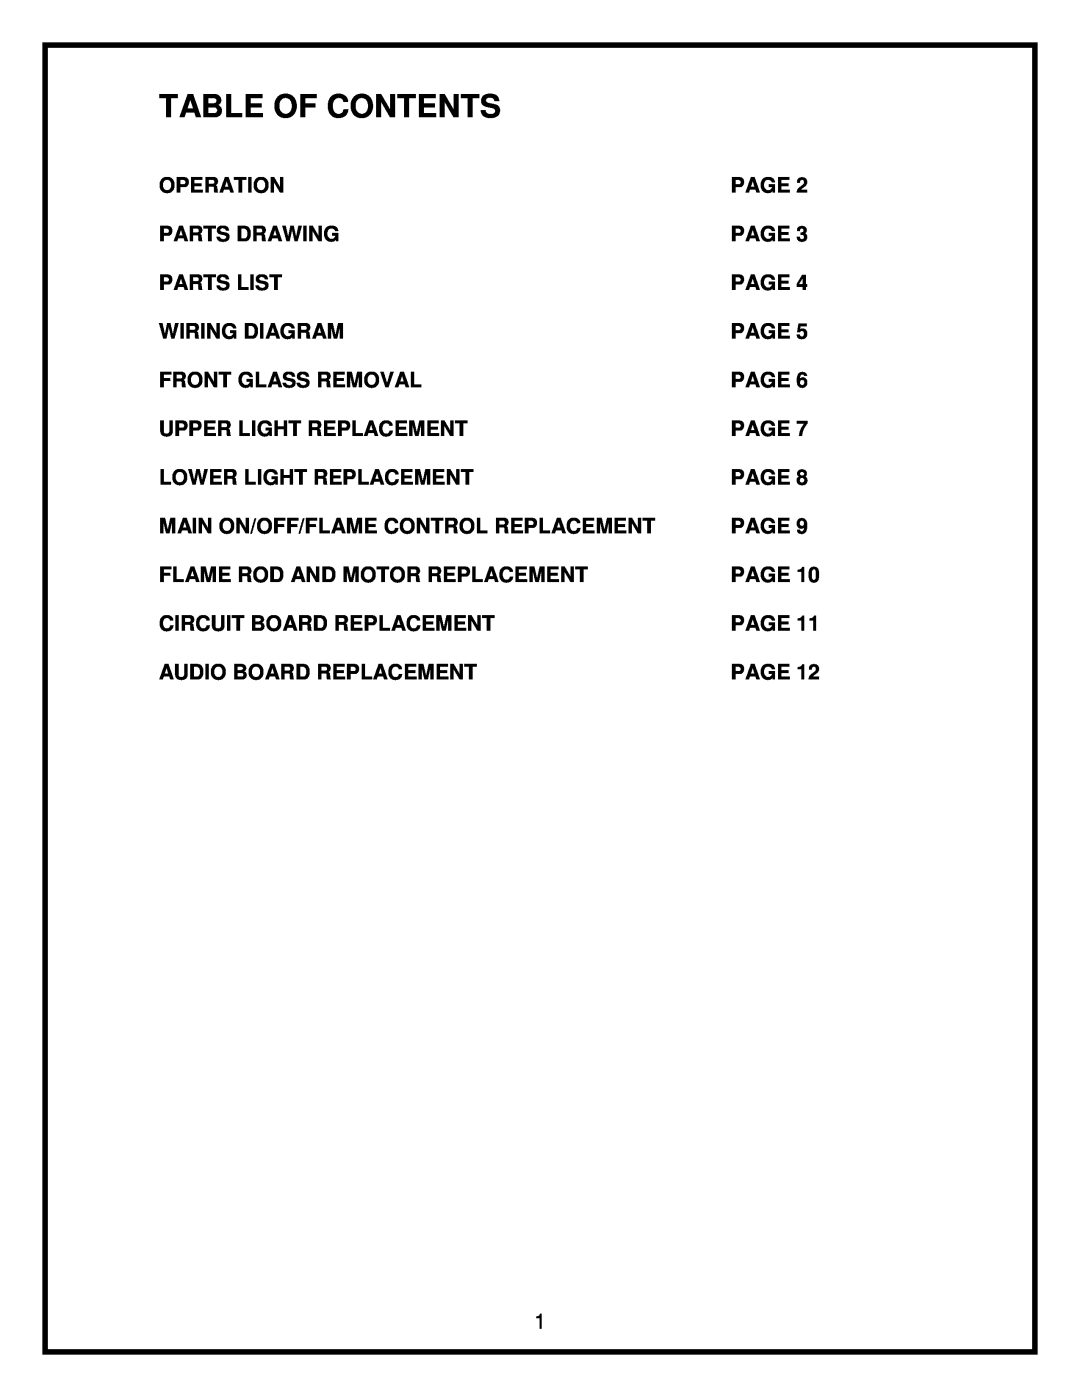 Dimplex 26 service manual Table Of Contents 